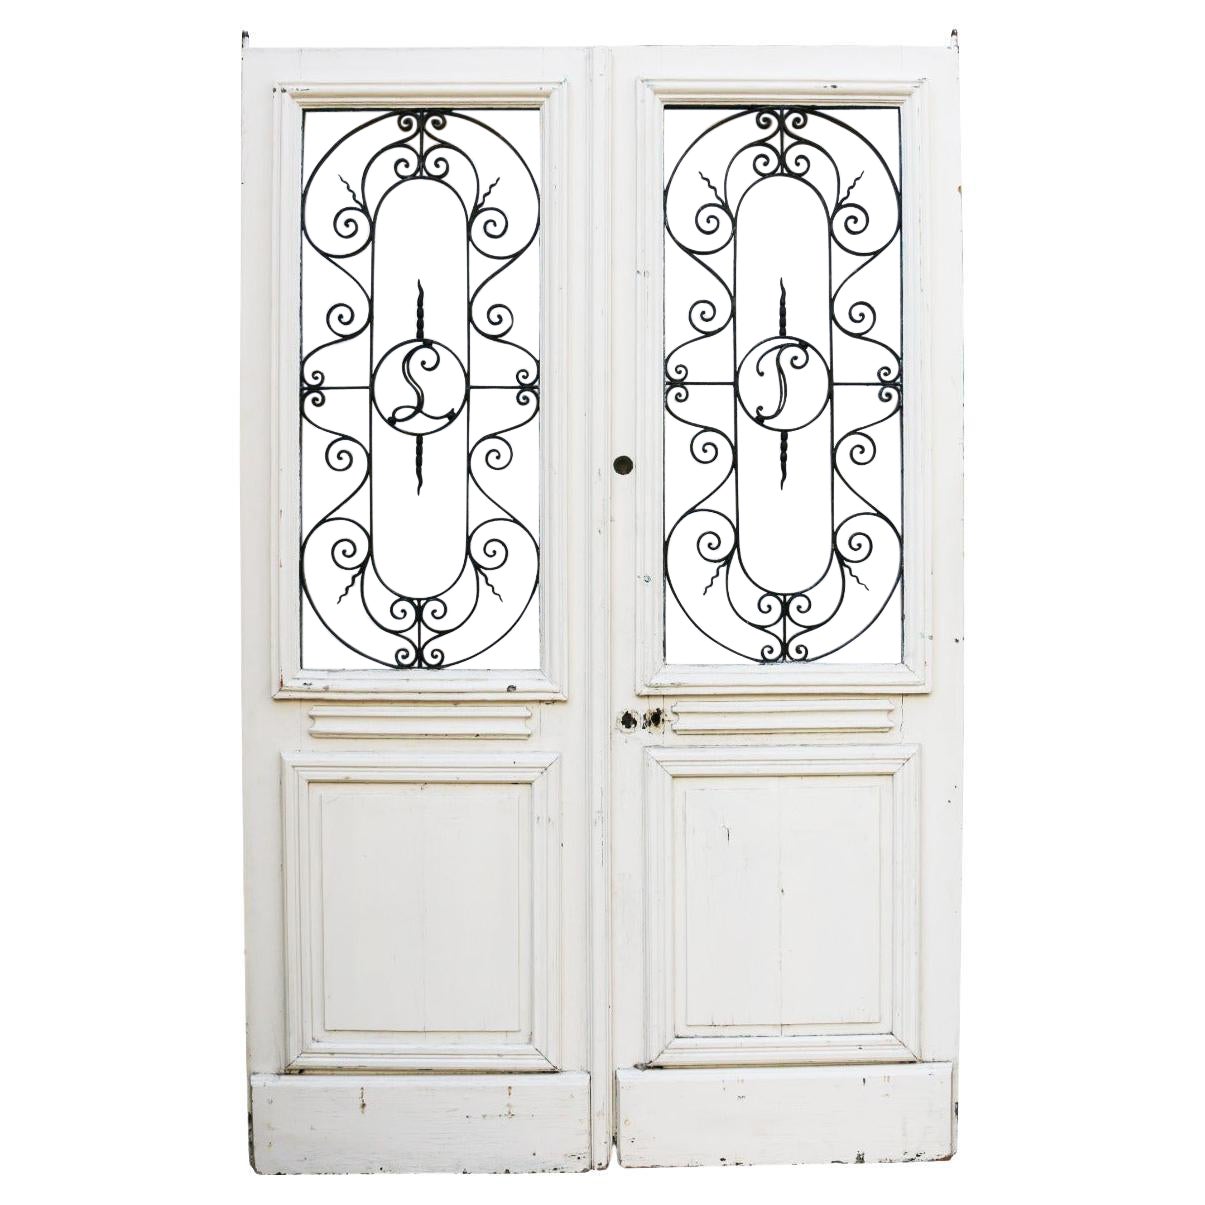 Pair of French Oak Doors with Wrought Iron Panels